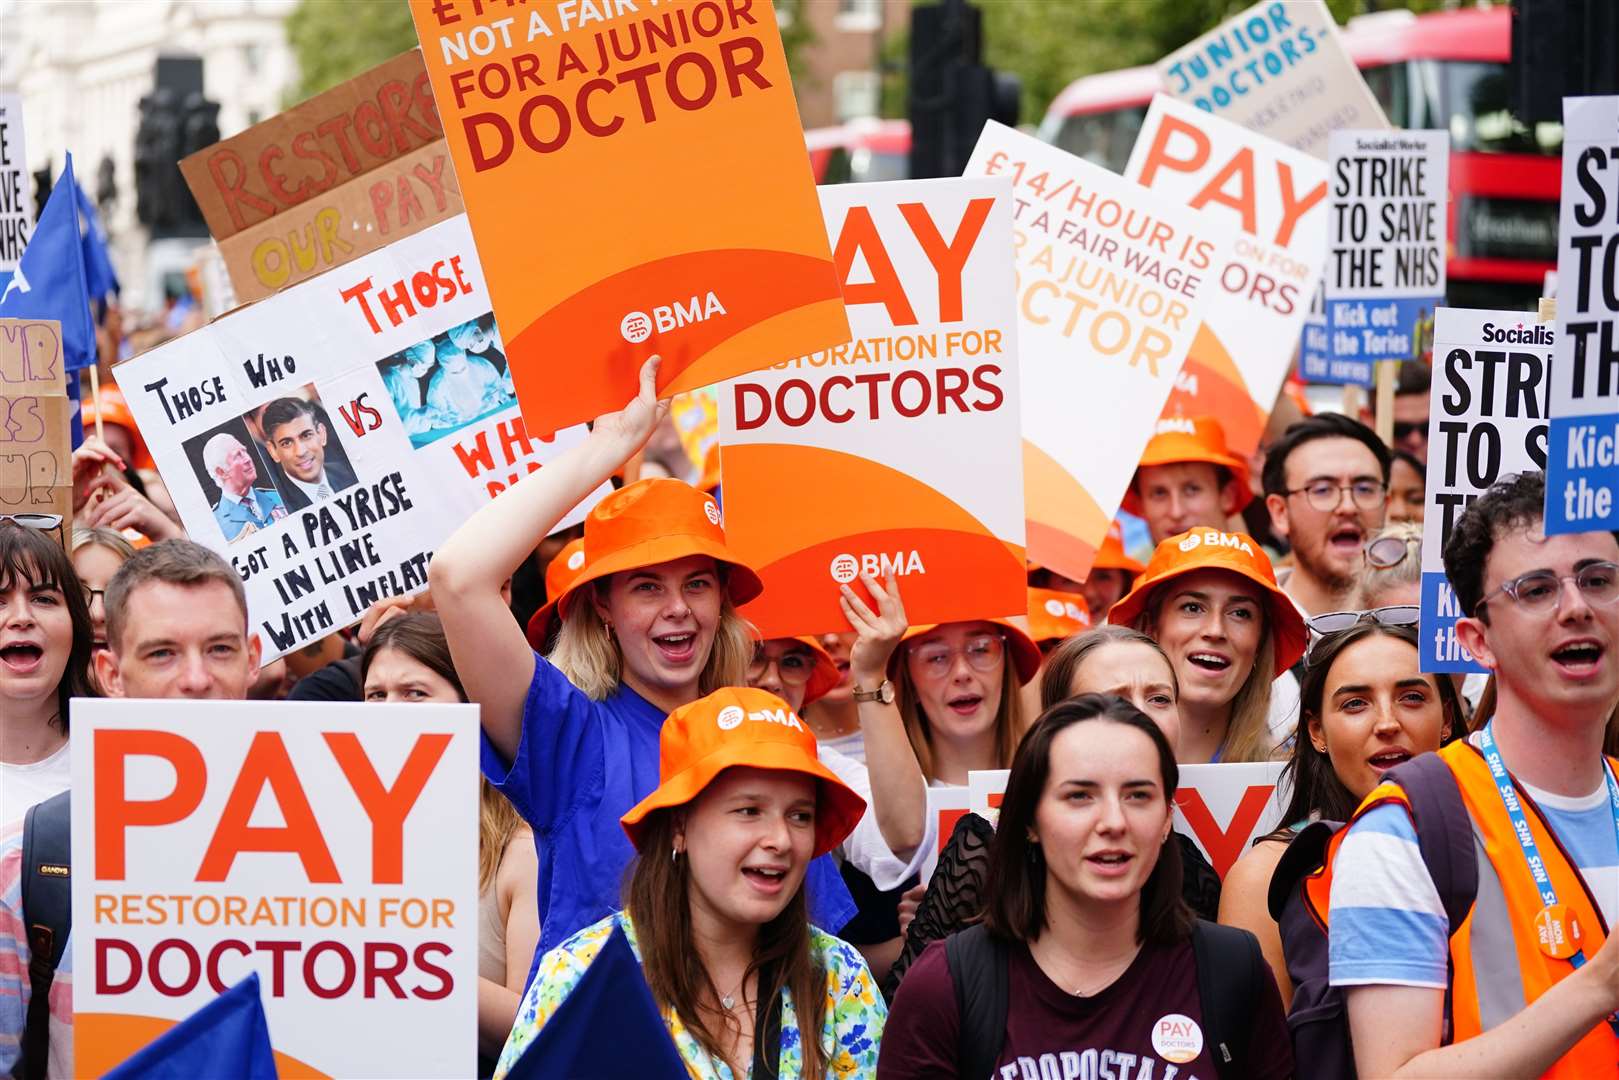 Junior doctors and consultants will strike on the same day for the first time in NHS history (Victoria Jones/PA)